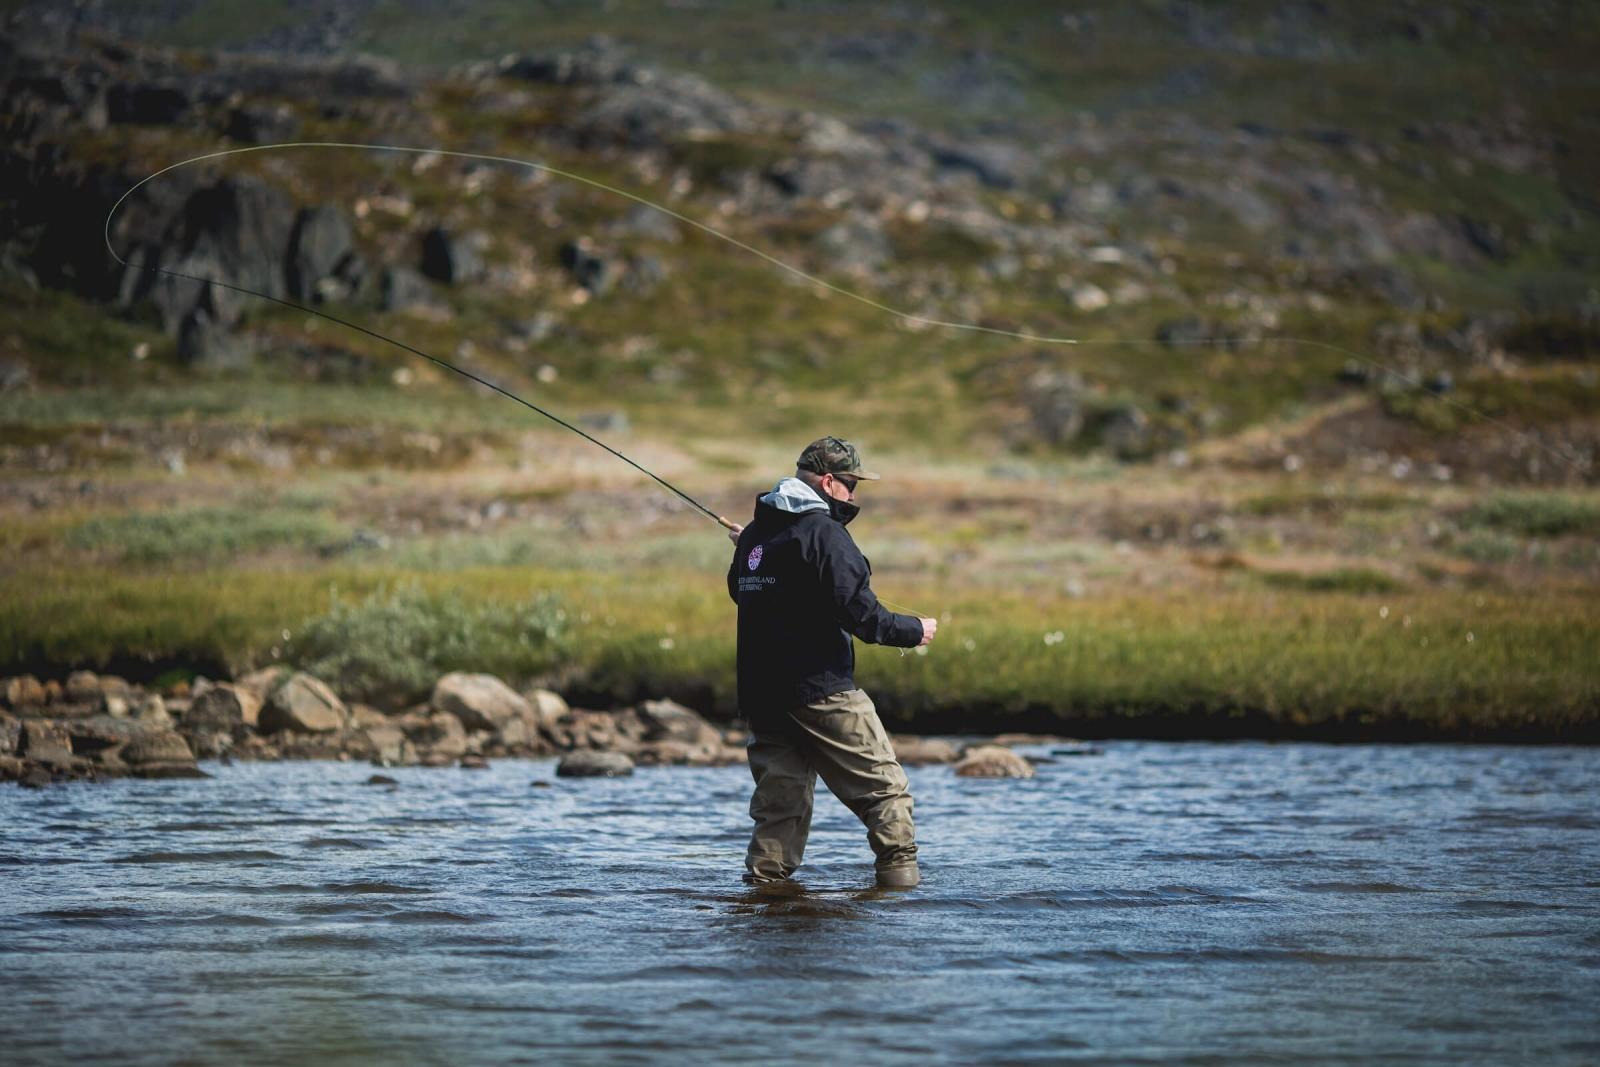 The guide from South Greenlanf Fly Fishing angling in the Narsaq backcountry. By Mads Pihl